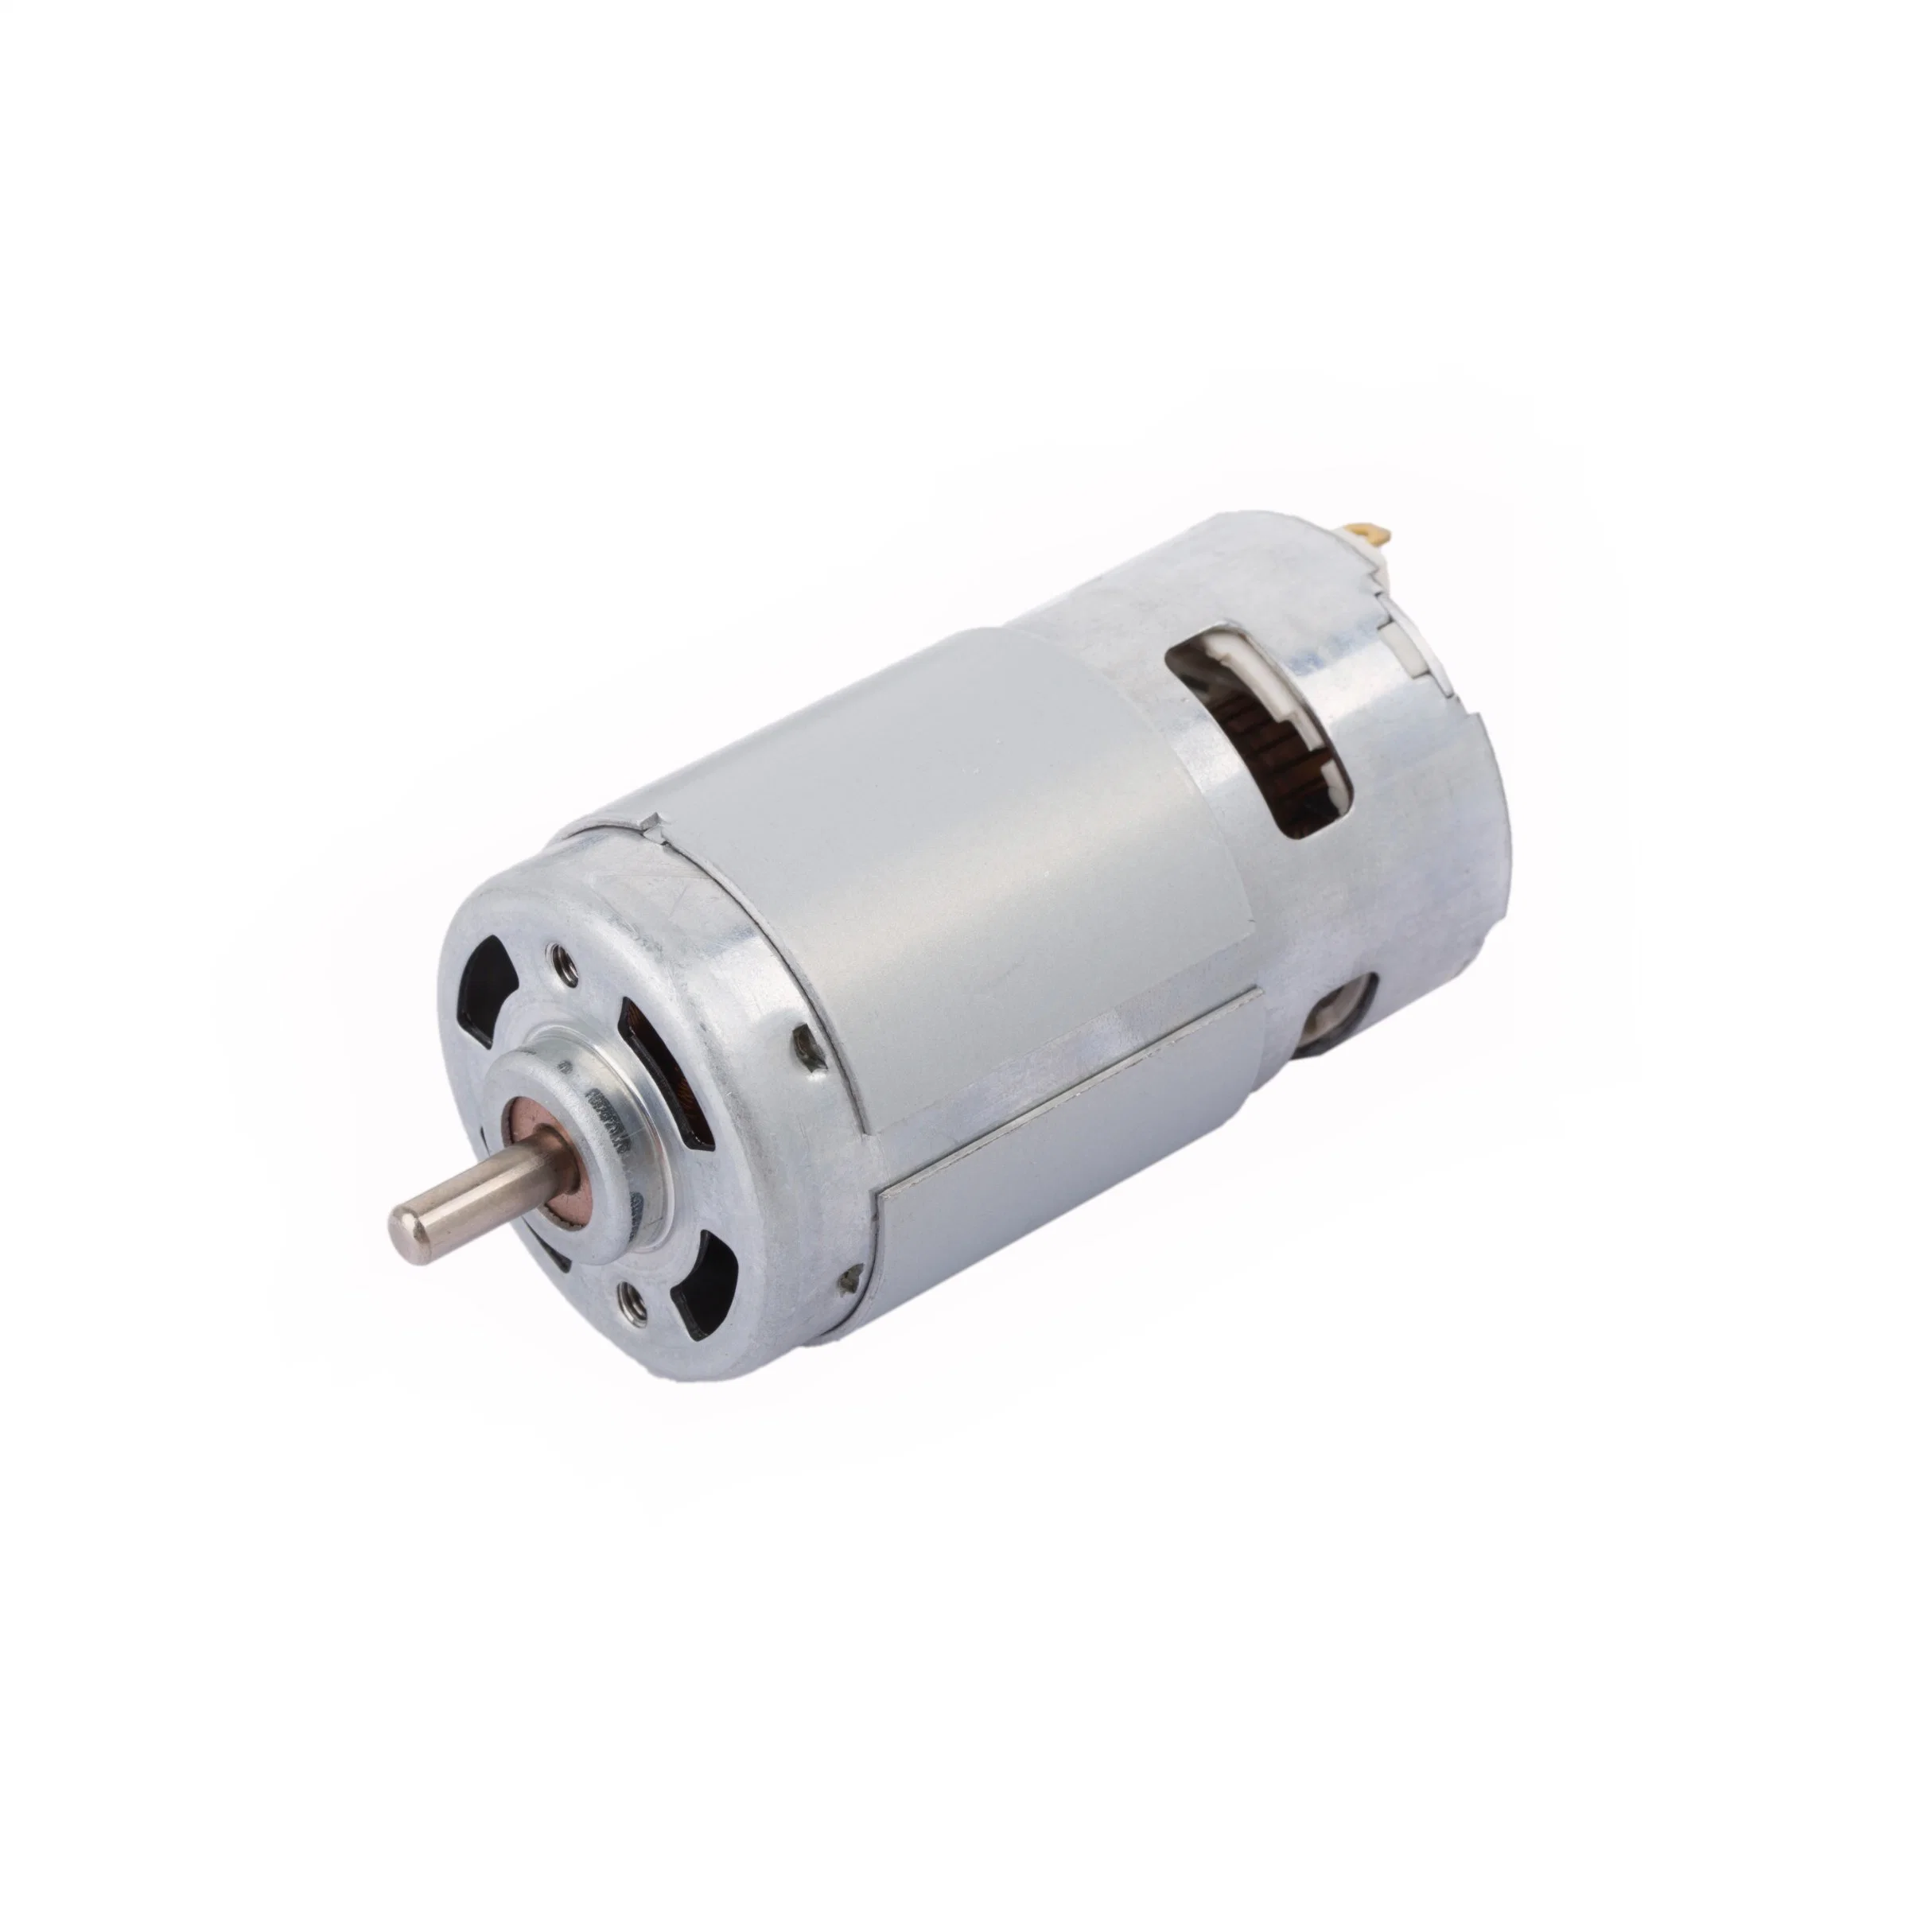 Kinmore Vehicle DC Motors Vehicle DC Electric Motor Stable Performance for Agricultural Pump